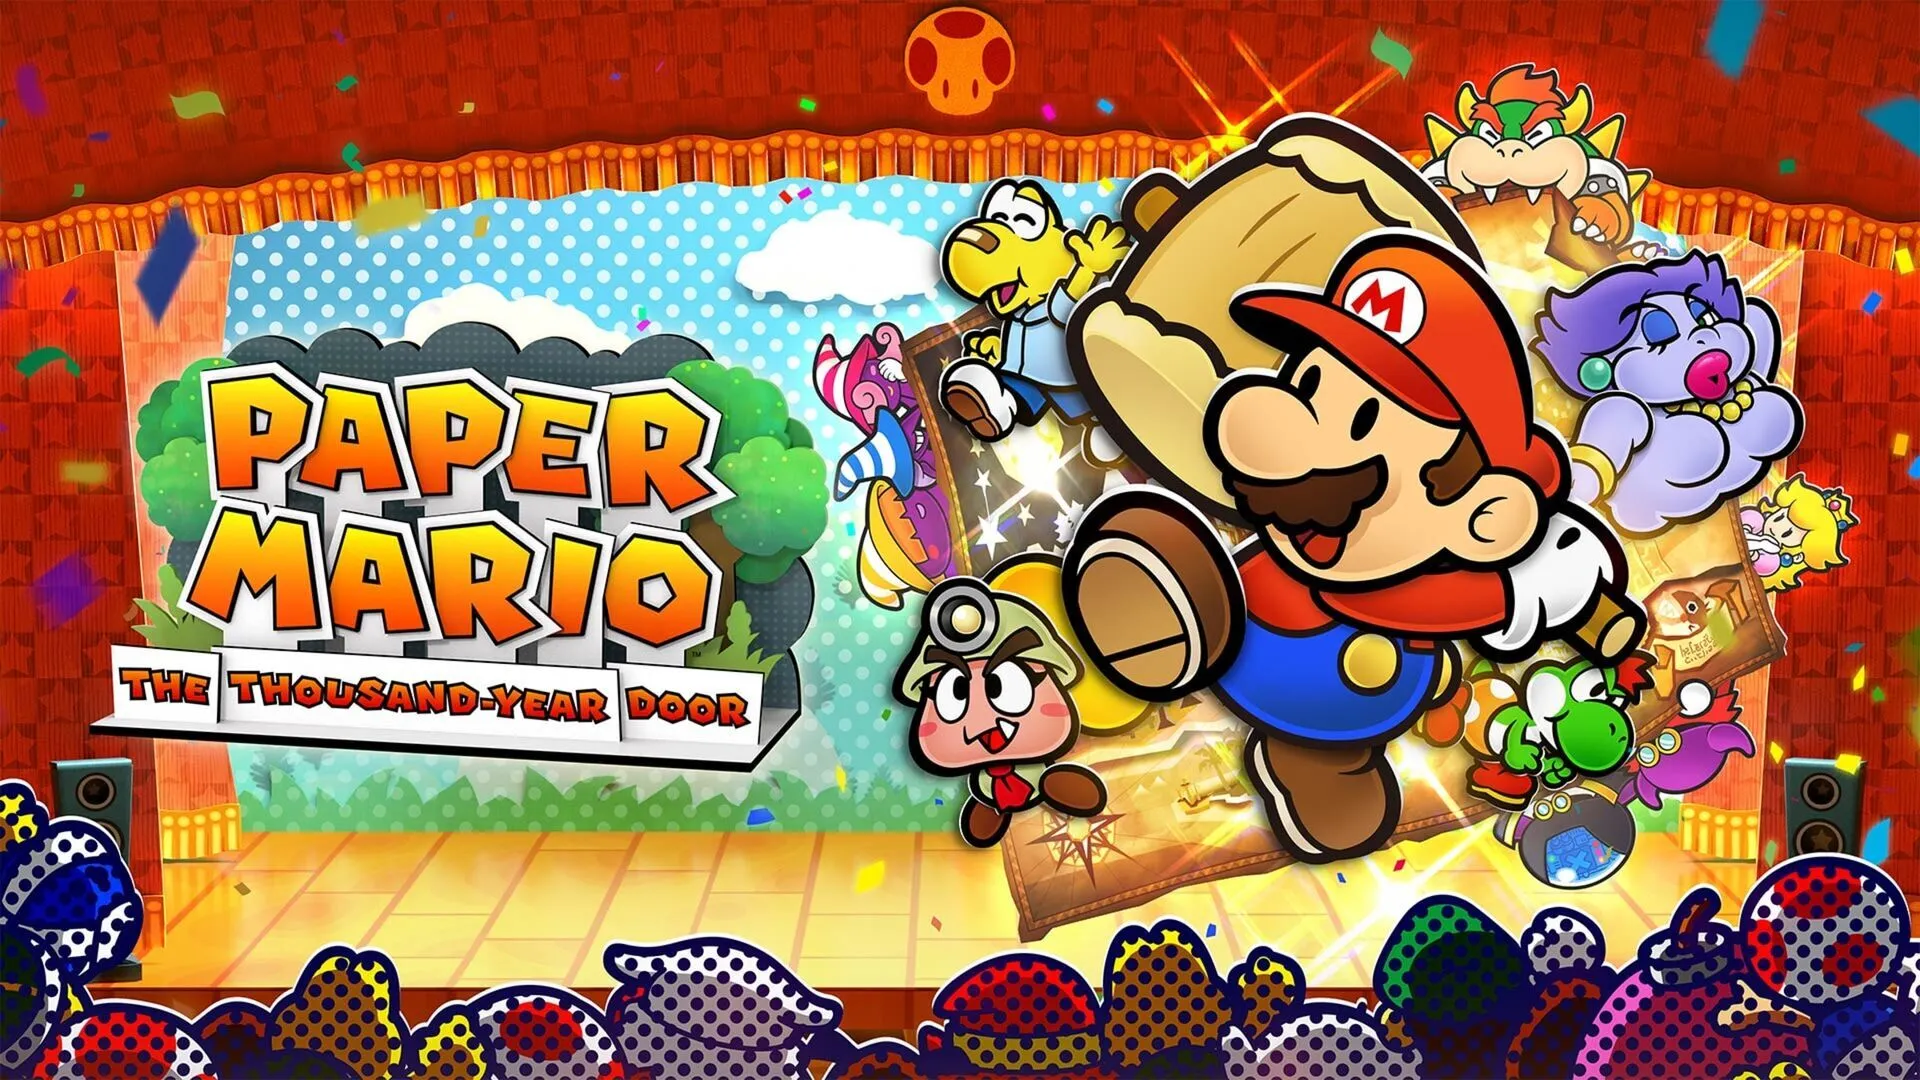 What does the new Paper Mario look like?